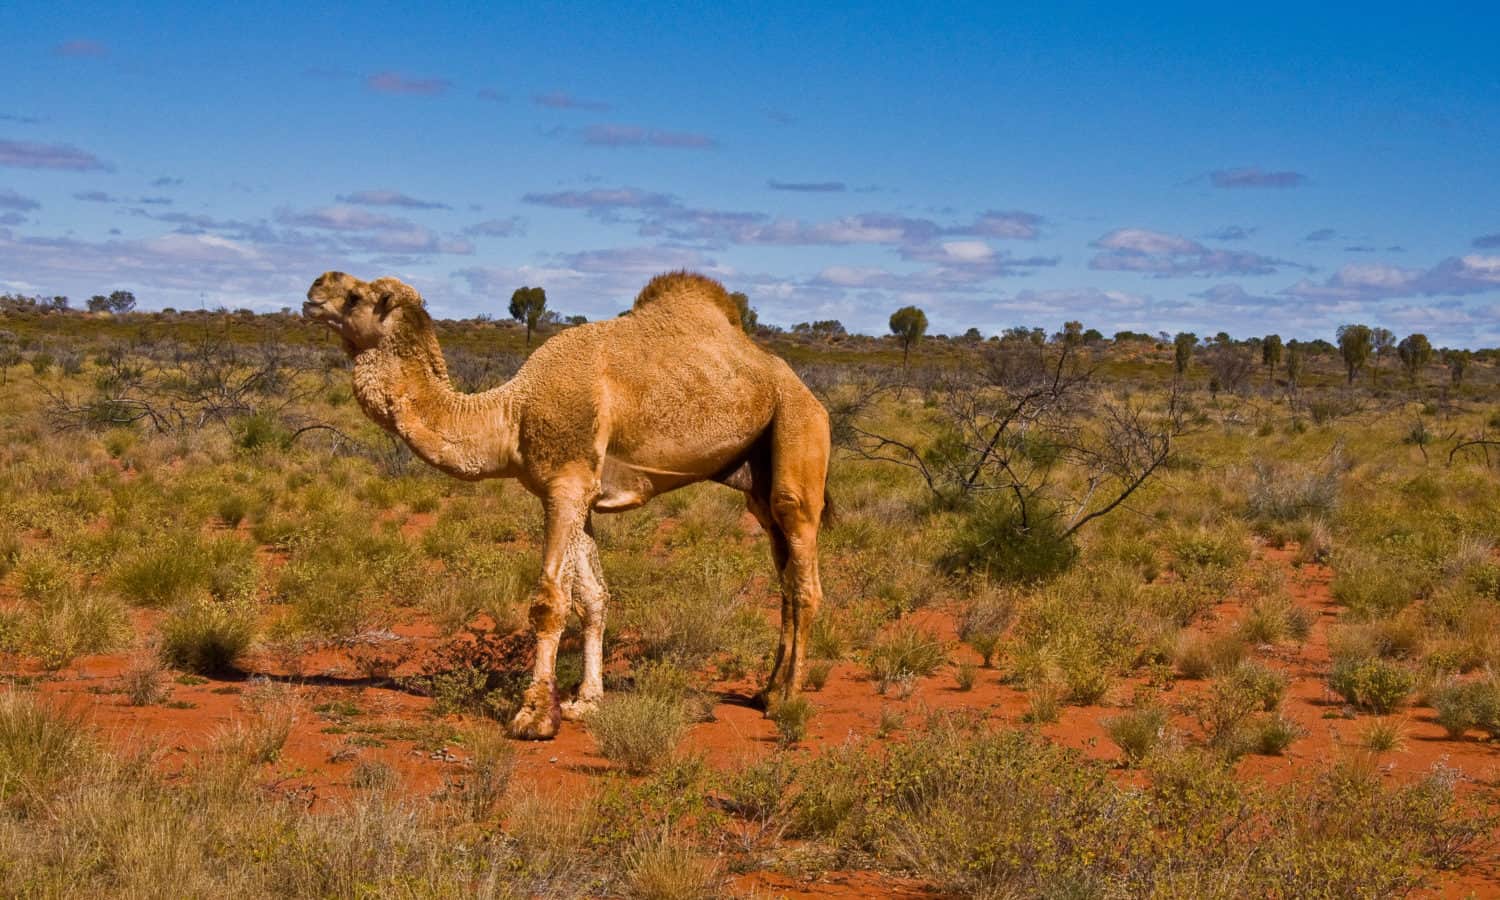 Camel meat is growing in popularity with American consumers through the Somalian diaspora, connecting food cultures and economies of the North America, Africa, and even the Australian outback.